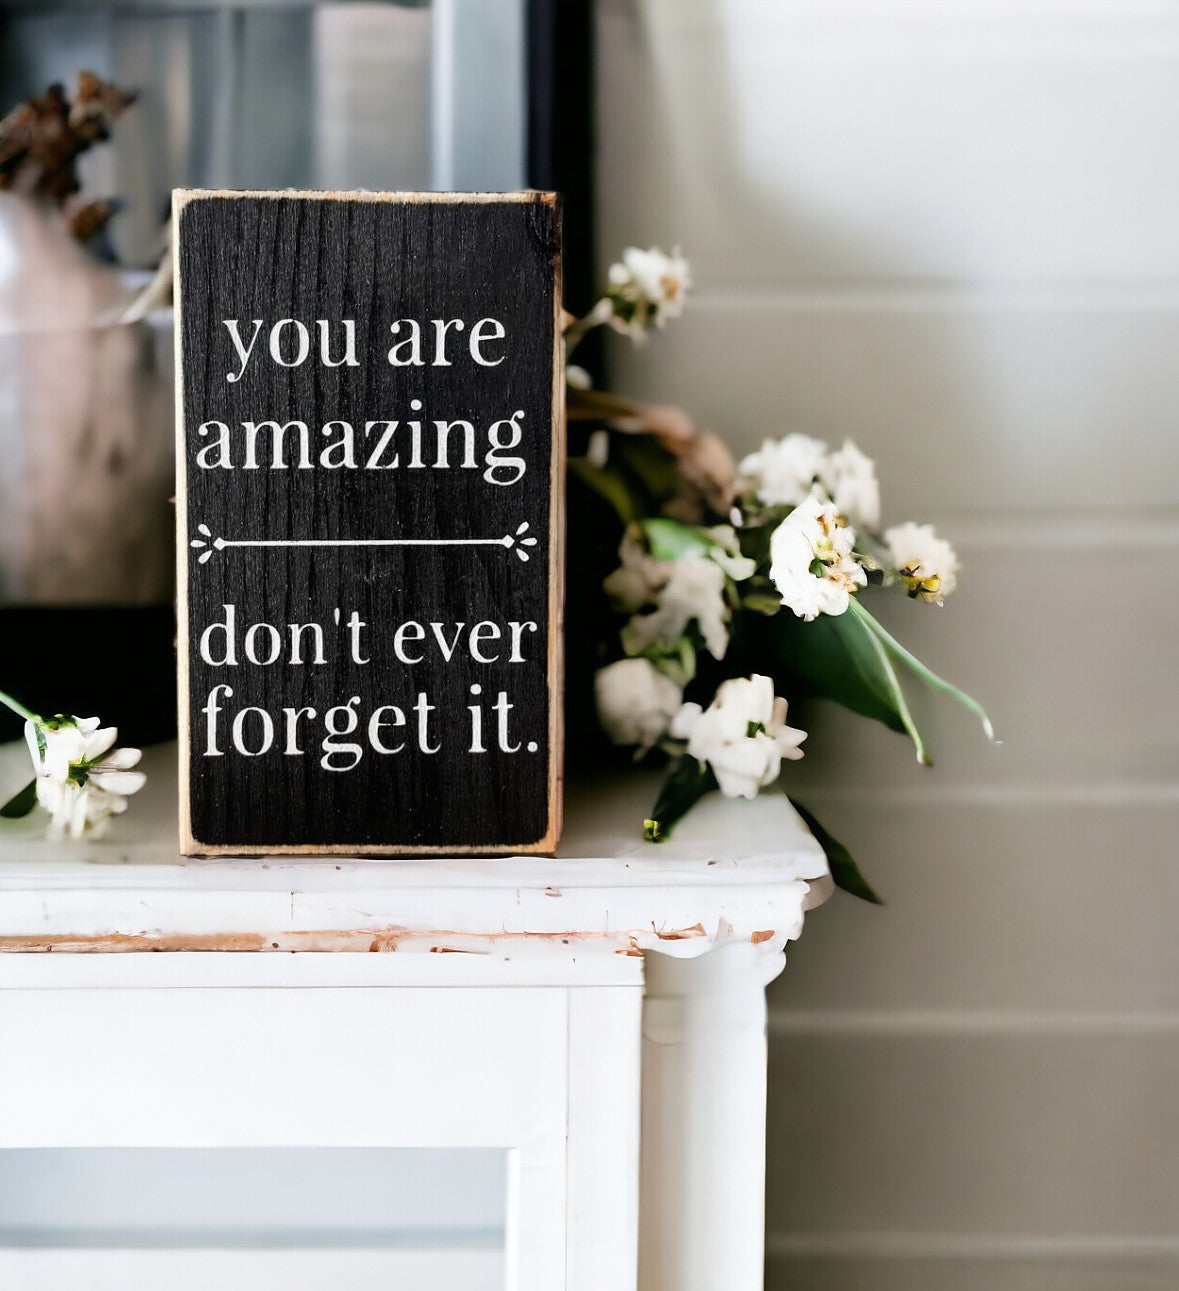 Inspirational wood sign: 'You Are Amazing, Remember That' - hand-painted black with white text, 3.5" x 6